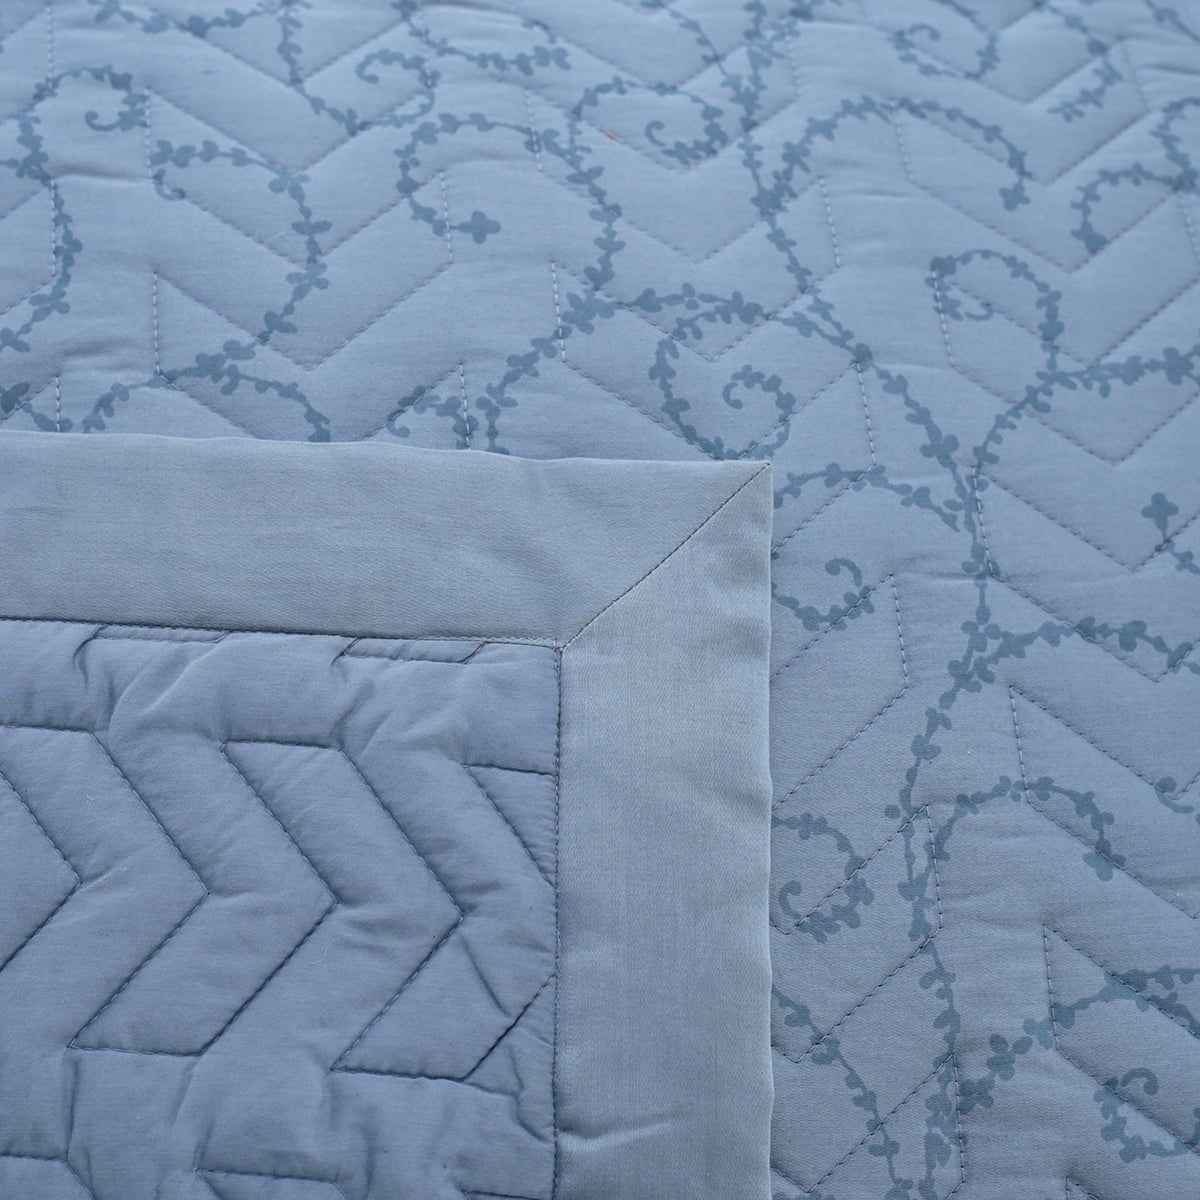 Exotic Heritage Leafy Swirl Blue Summer AC Quilt/Quilted Bed Cover/Comforter Quilt